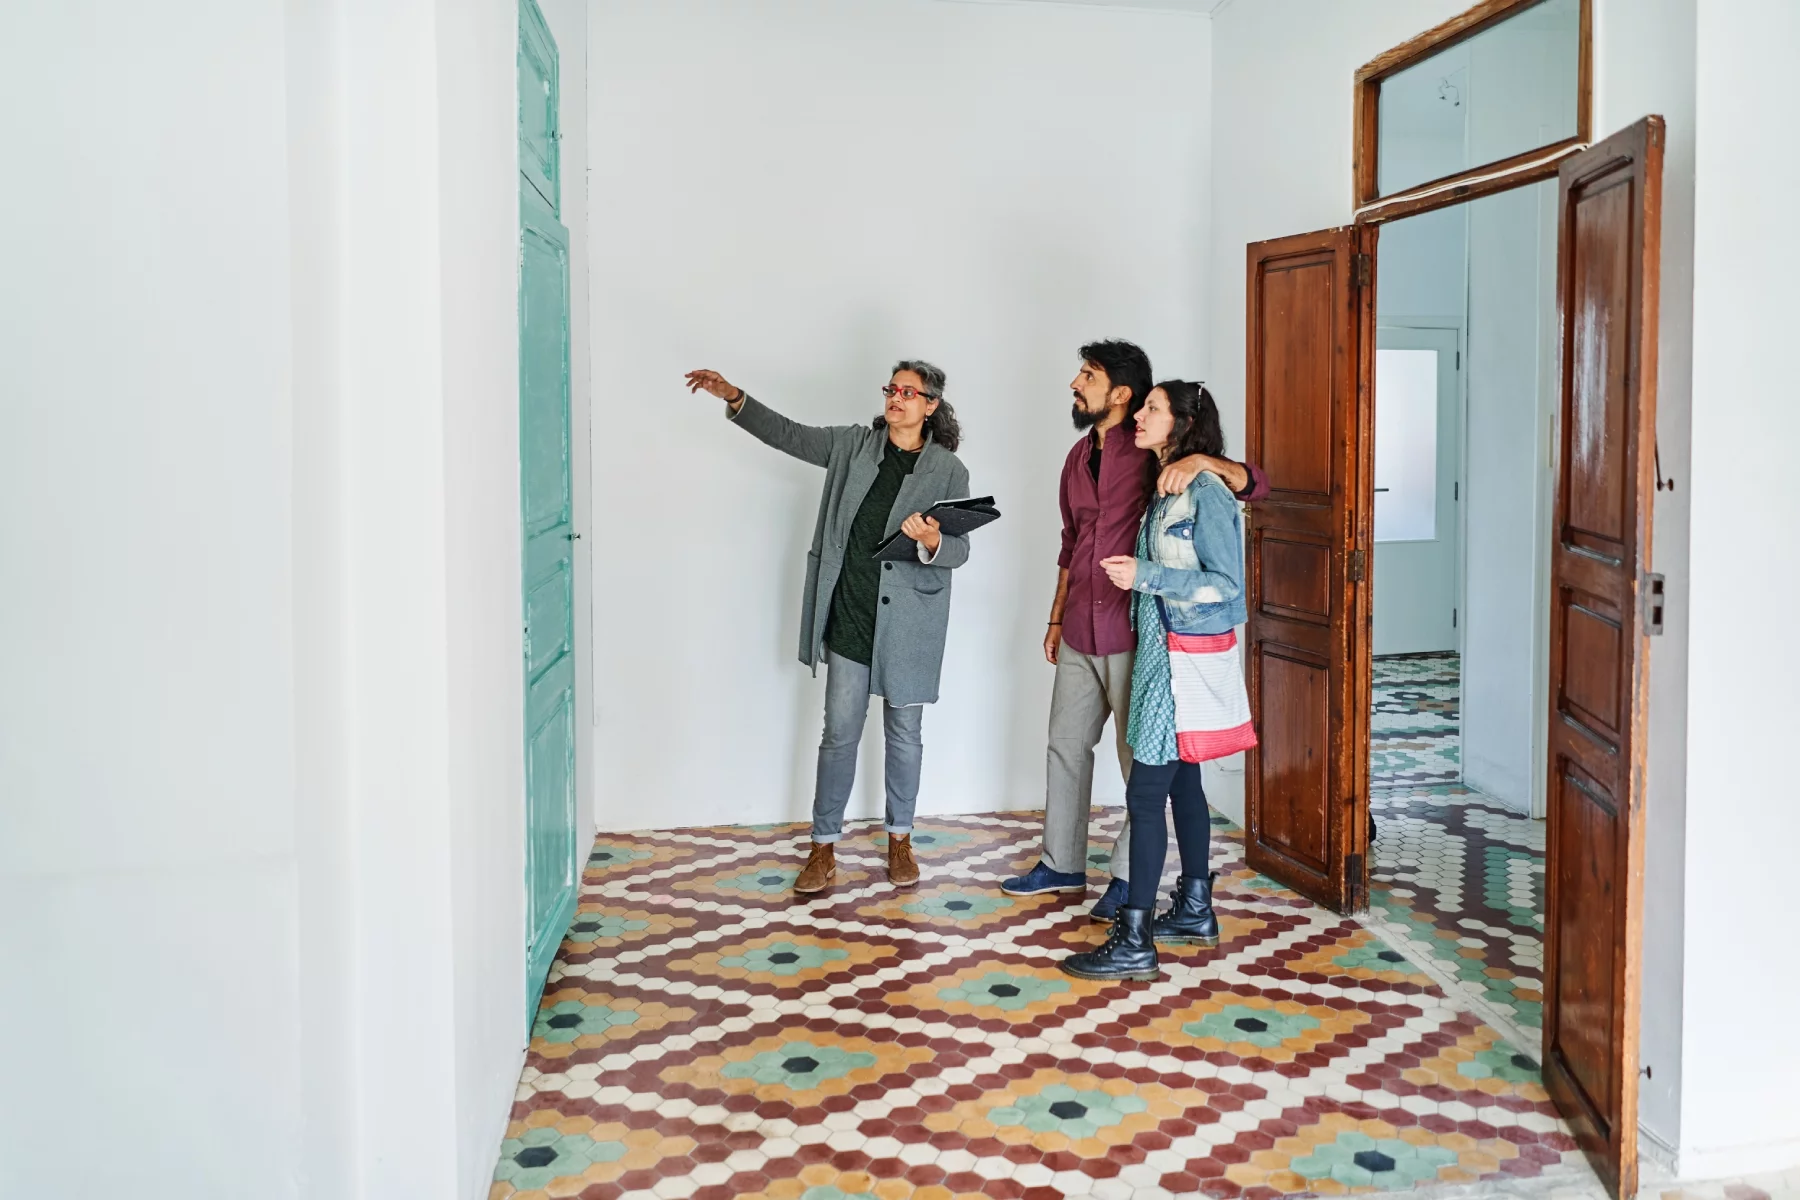 An estate agent showing a couple around a flat in Valencia. White walls, colored tiled floor.